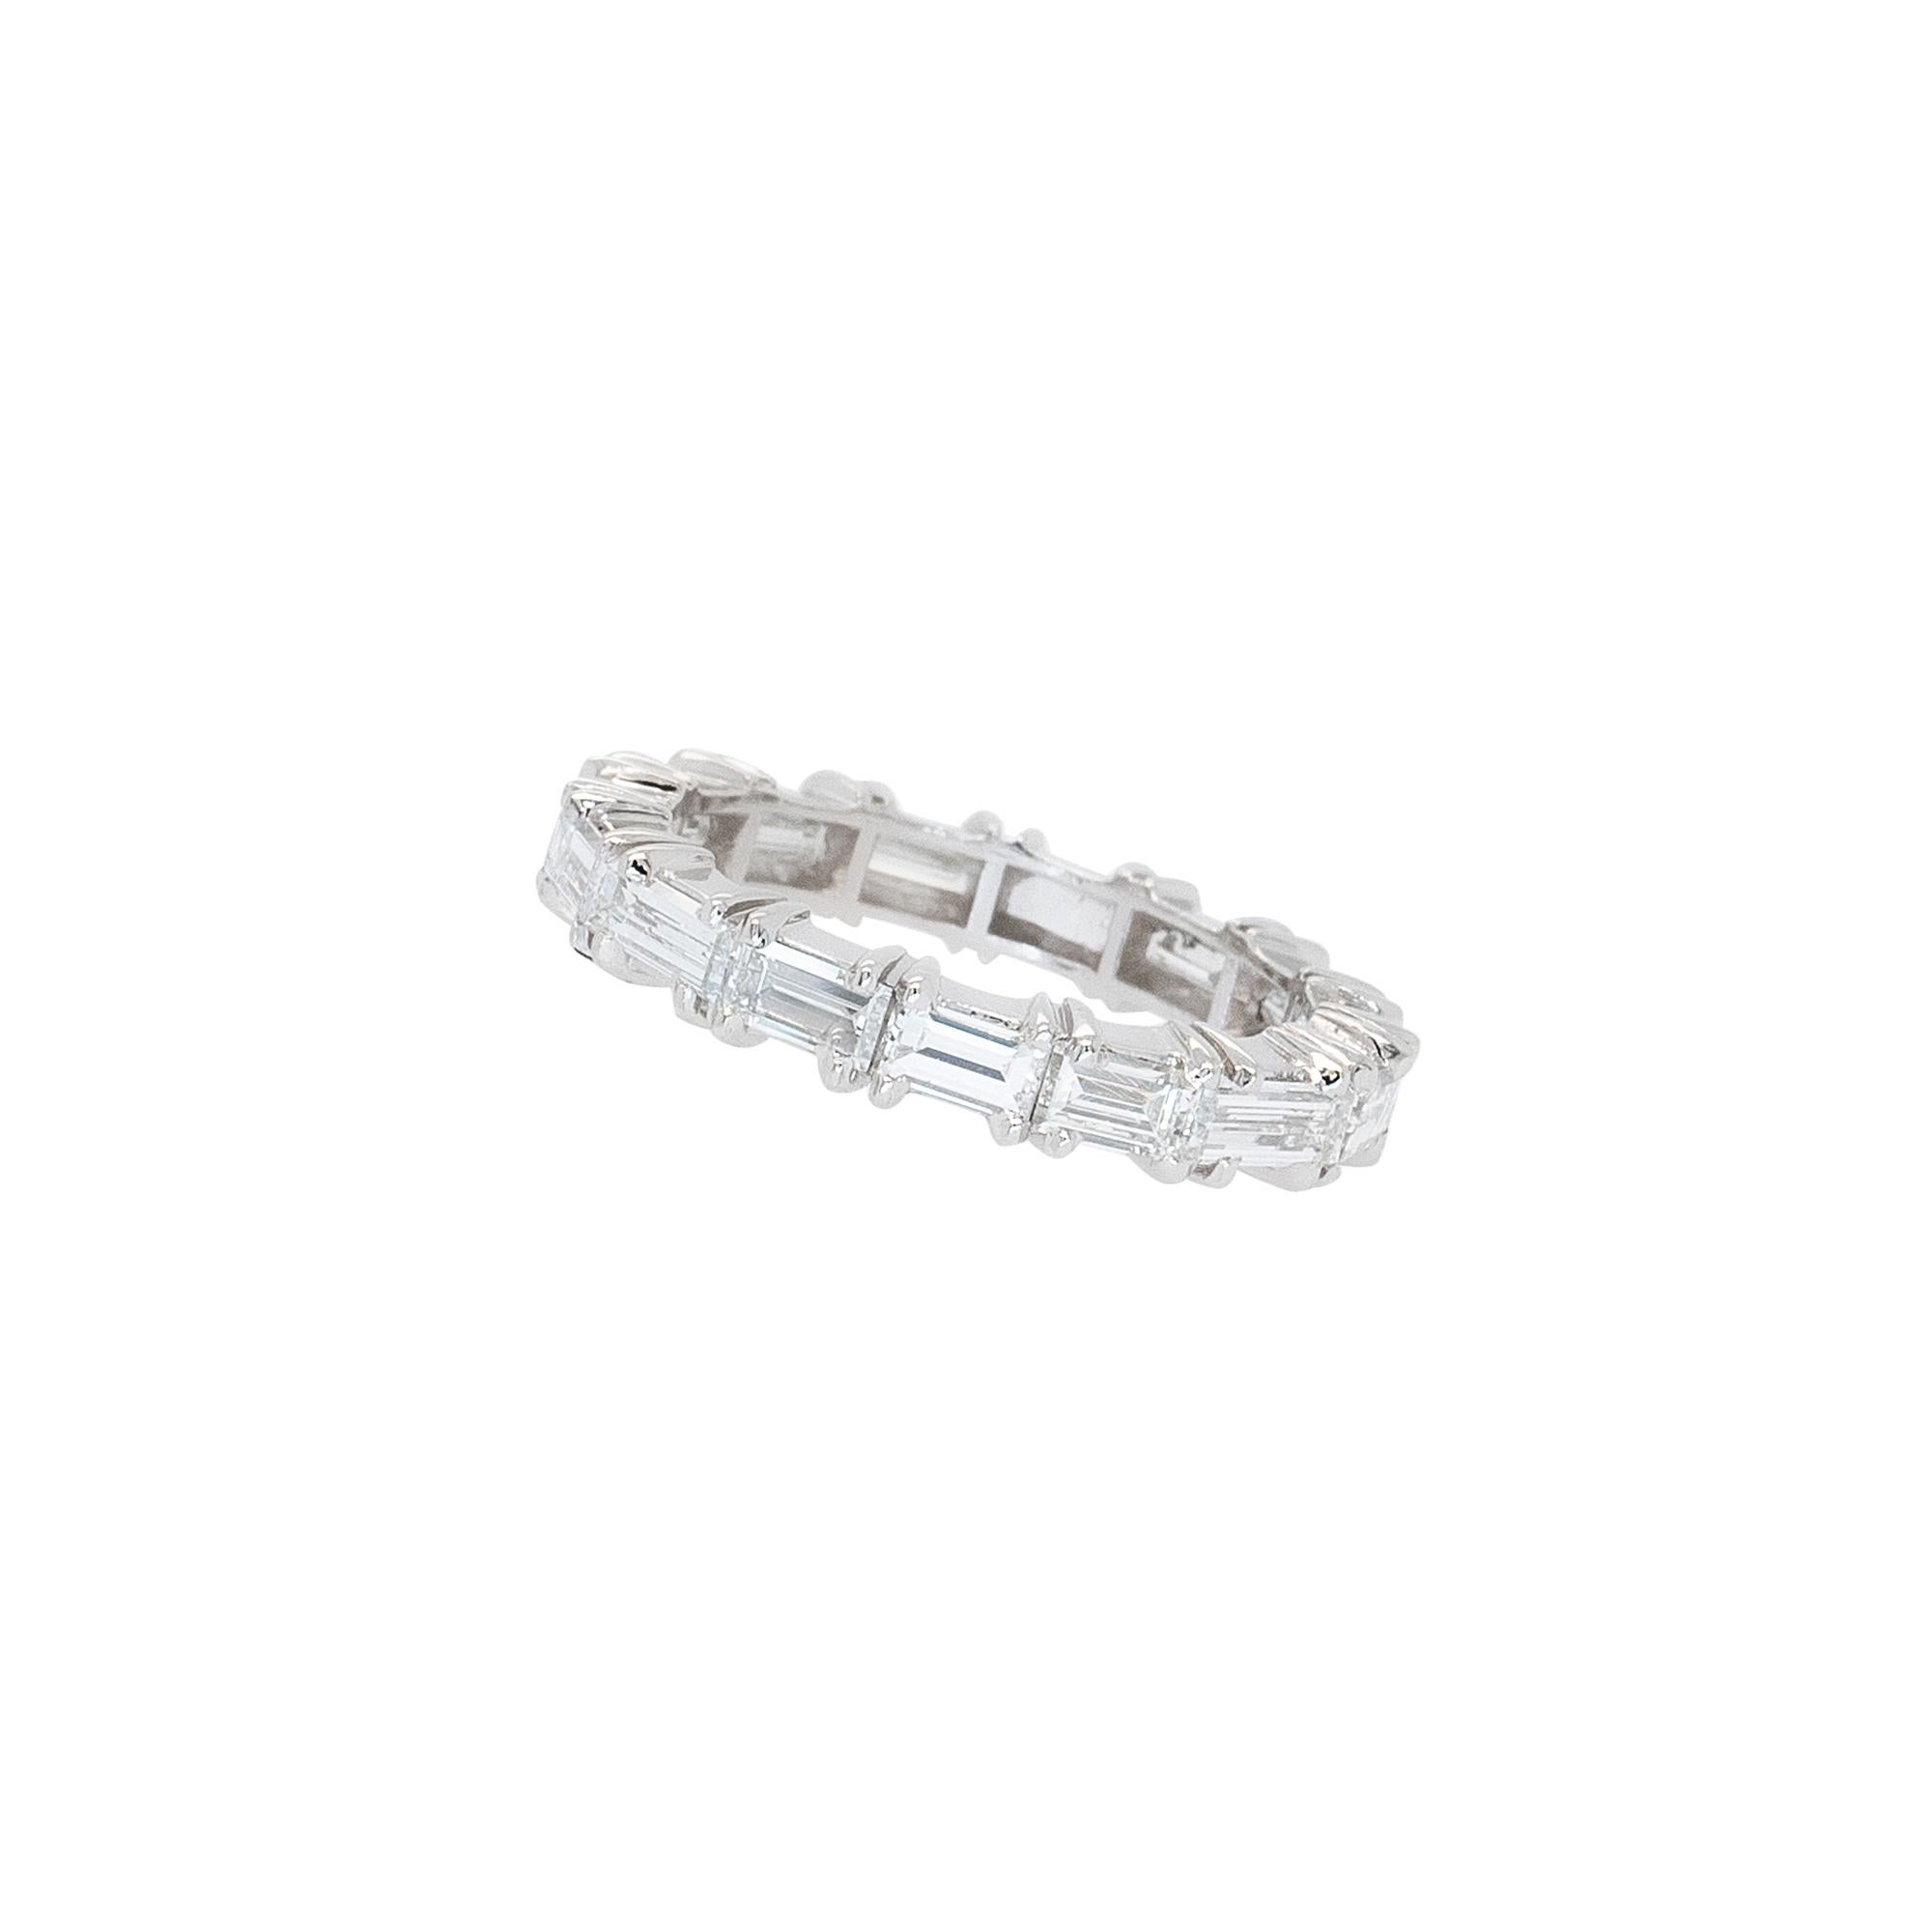 Diamond Details:
7.5ctw Straight Baguette Cut
G/H Color VS Clarity
15 Stones
Ring Material: Platinum
Ring Size: 6 (can be sized)
Total Weight: 4.1g (2.7dwt)
This item comes with a presentation box!
SKU: R6300

Radiating a timeless elegance, this